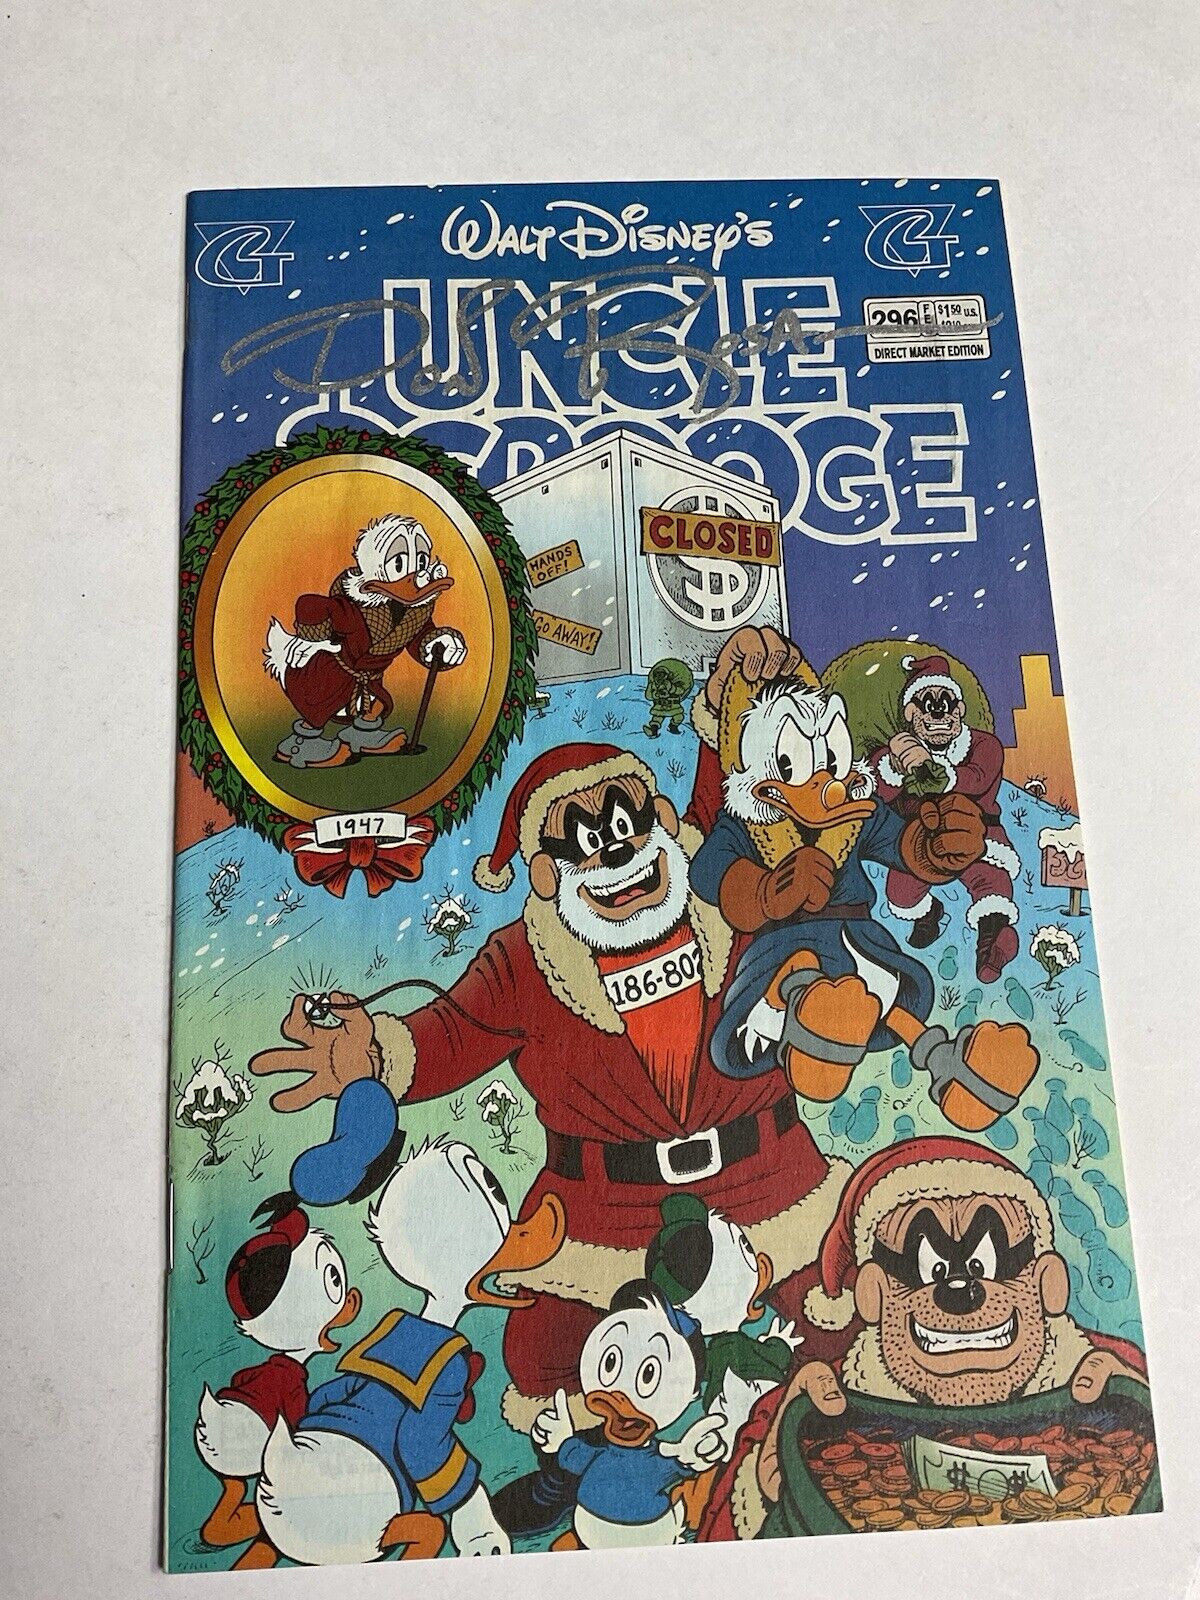 AUTOGRAPHED Uncle Scrooge #296 Signed by Artist Don Rosa NM Unread 9.4